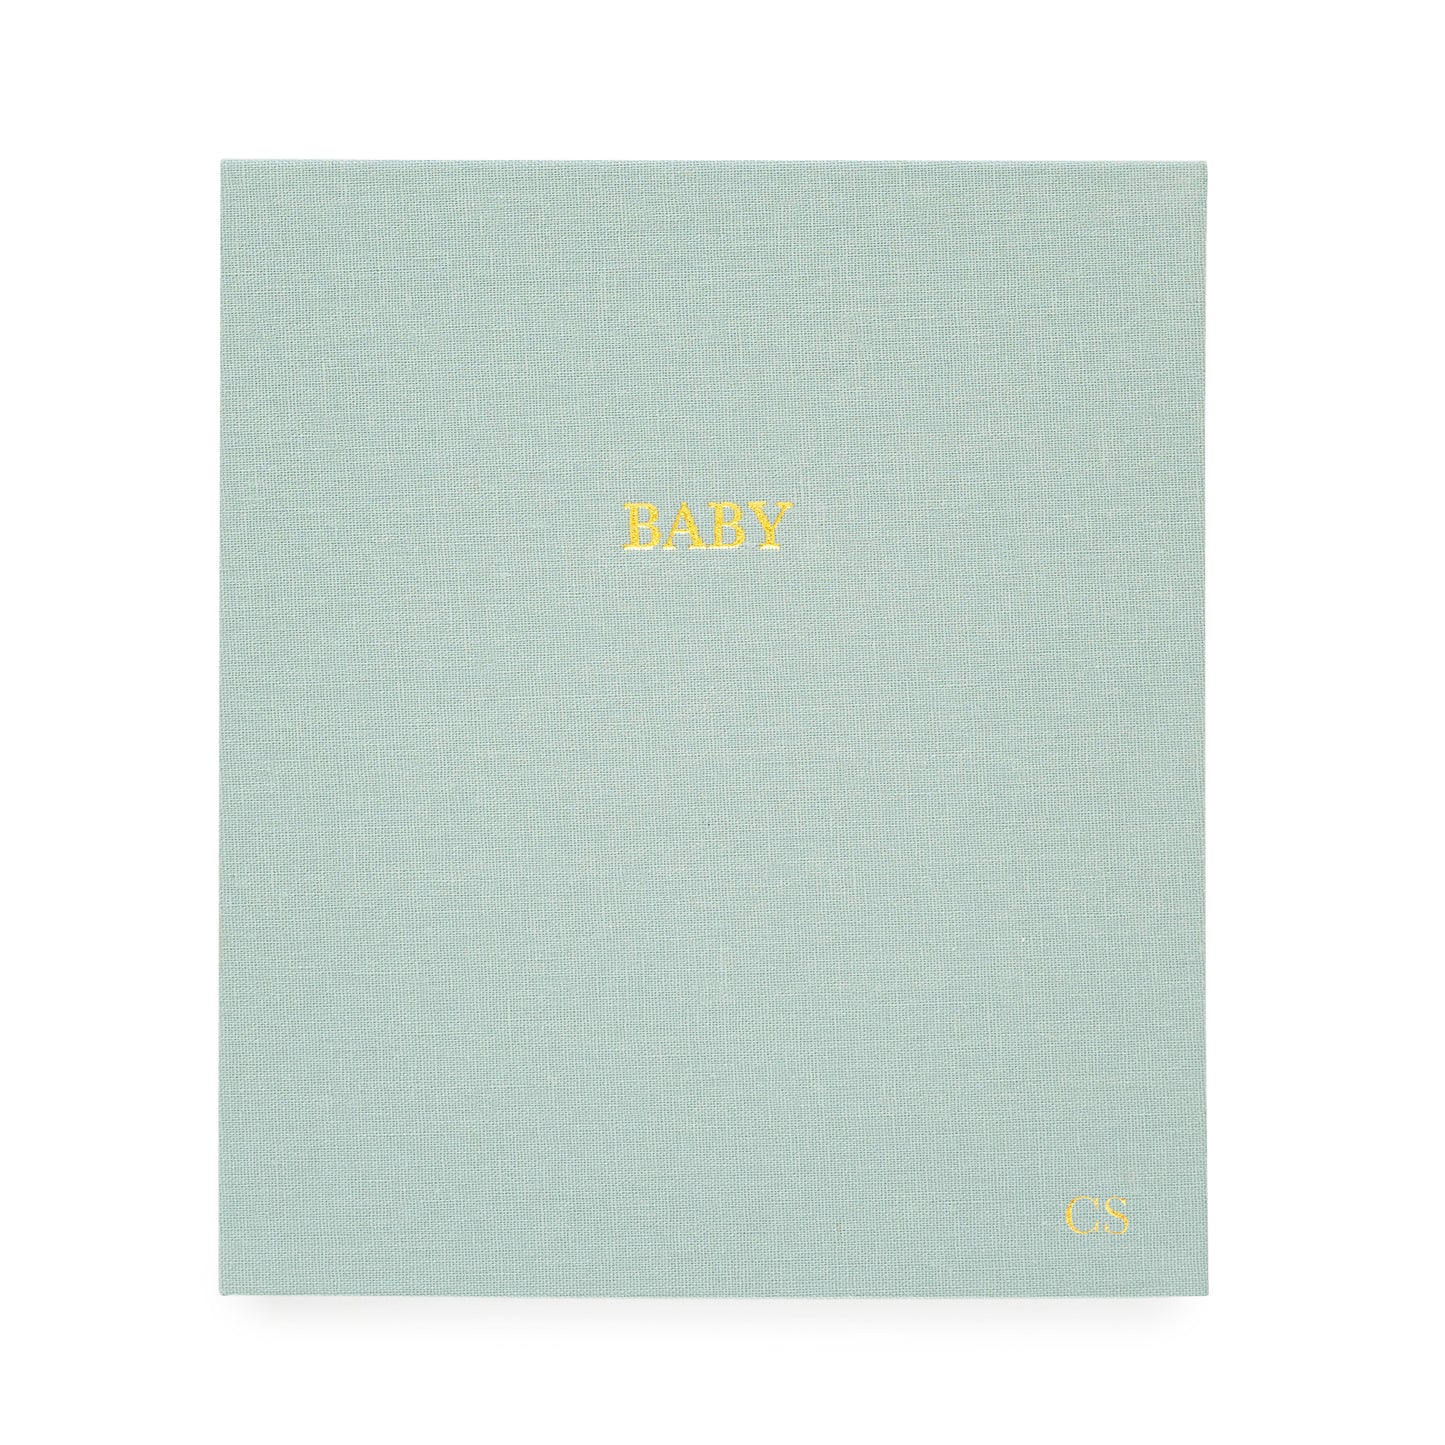 Mist Green Baby book with gold foil baby and monogram initials